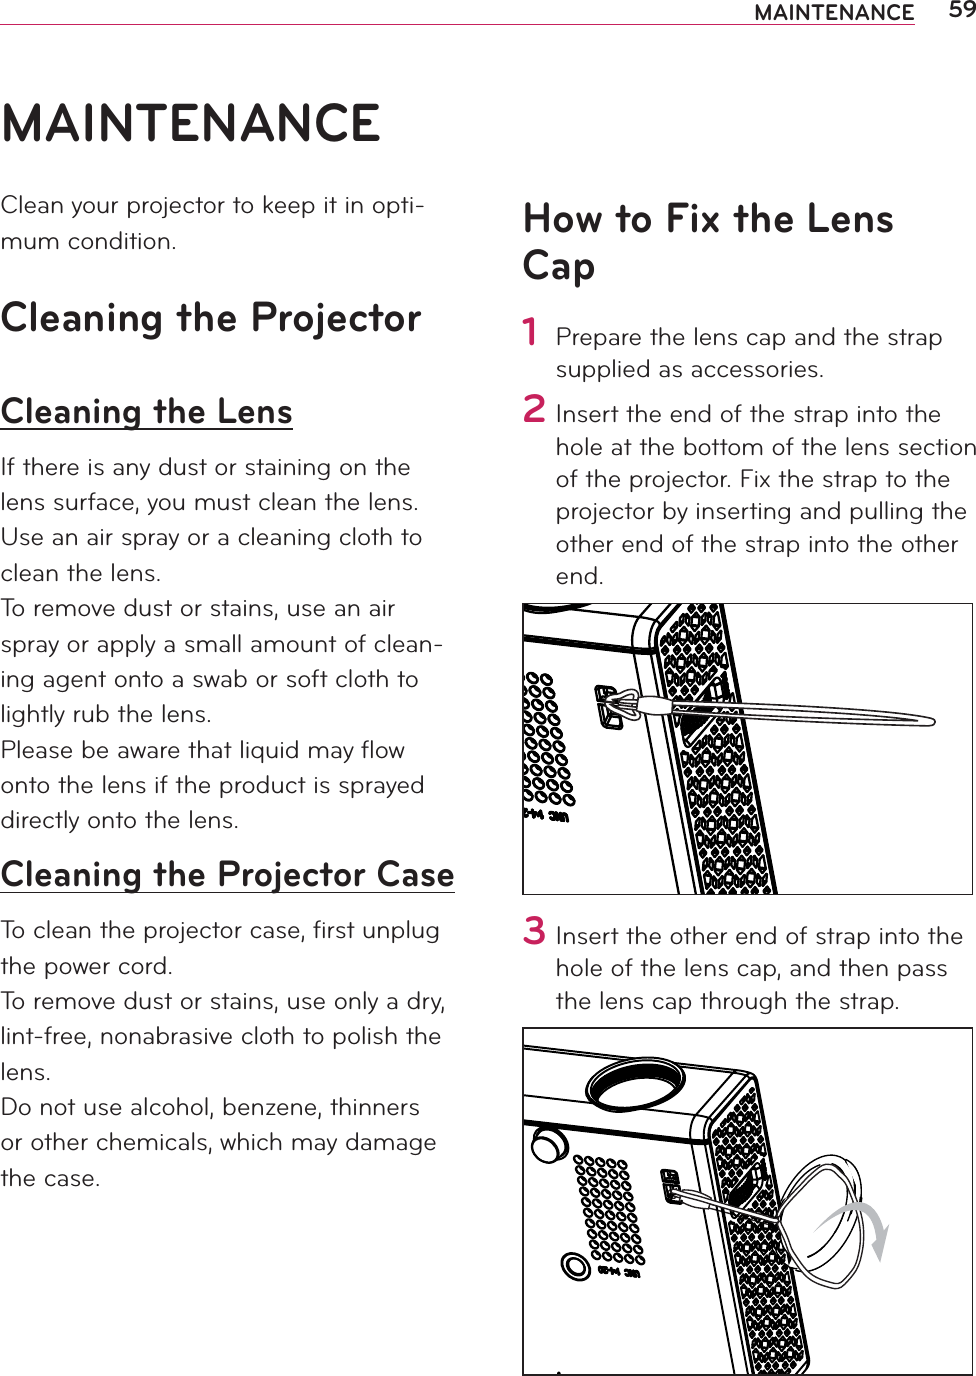 59MAINTENANCEMAINTENANCEClean your projector to keep it in opti-mum condition.Cleaning the ProjectorCleaning the LensIf there is any dust or staining on the lens surface, you must clean the lens.Use an air spray or a cleaning cloth to clean the lens.To remove dust or stains, use an air spray or apply a small amount of clean-ing agent onto a swab or soft cloth to lightly rub the lens.Please be aware that liquid may ﬂow onto the lens if the product is sprayed directly onto the lens.Cleaning the Projector CaseTo clean the projector case, ﬁrst unplug the power cord.To remove dust or stains, use only a dry, lint-free, nonabrasive cloth to polish the lens.Do not use alcohol, benzene, thinners or other chemicals, which may damage the case.How to Fix the Lens Cap1 Prepare the lens cap and the strap supplied as accessories. 2 Insert the end of the strap into the hole at the bottom of the lens section of the projector. Fix the strap to the projector by inserting and pulling the other end of the strap into the other end.3 Insert the other end of strap into the hole of the lens cap, and then pass the lens cap through the strap.